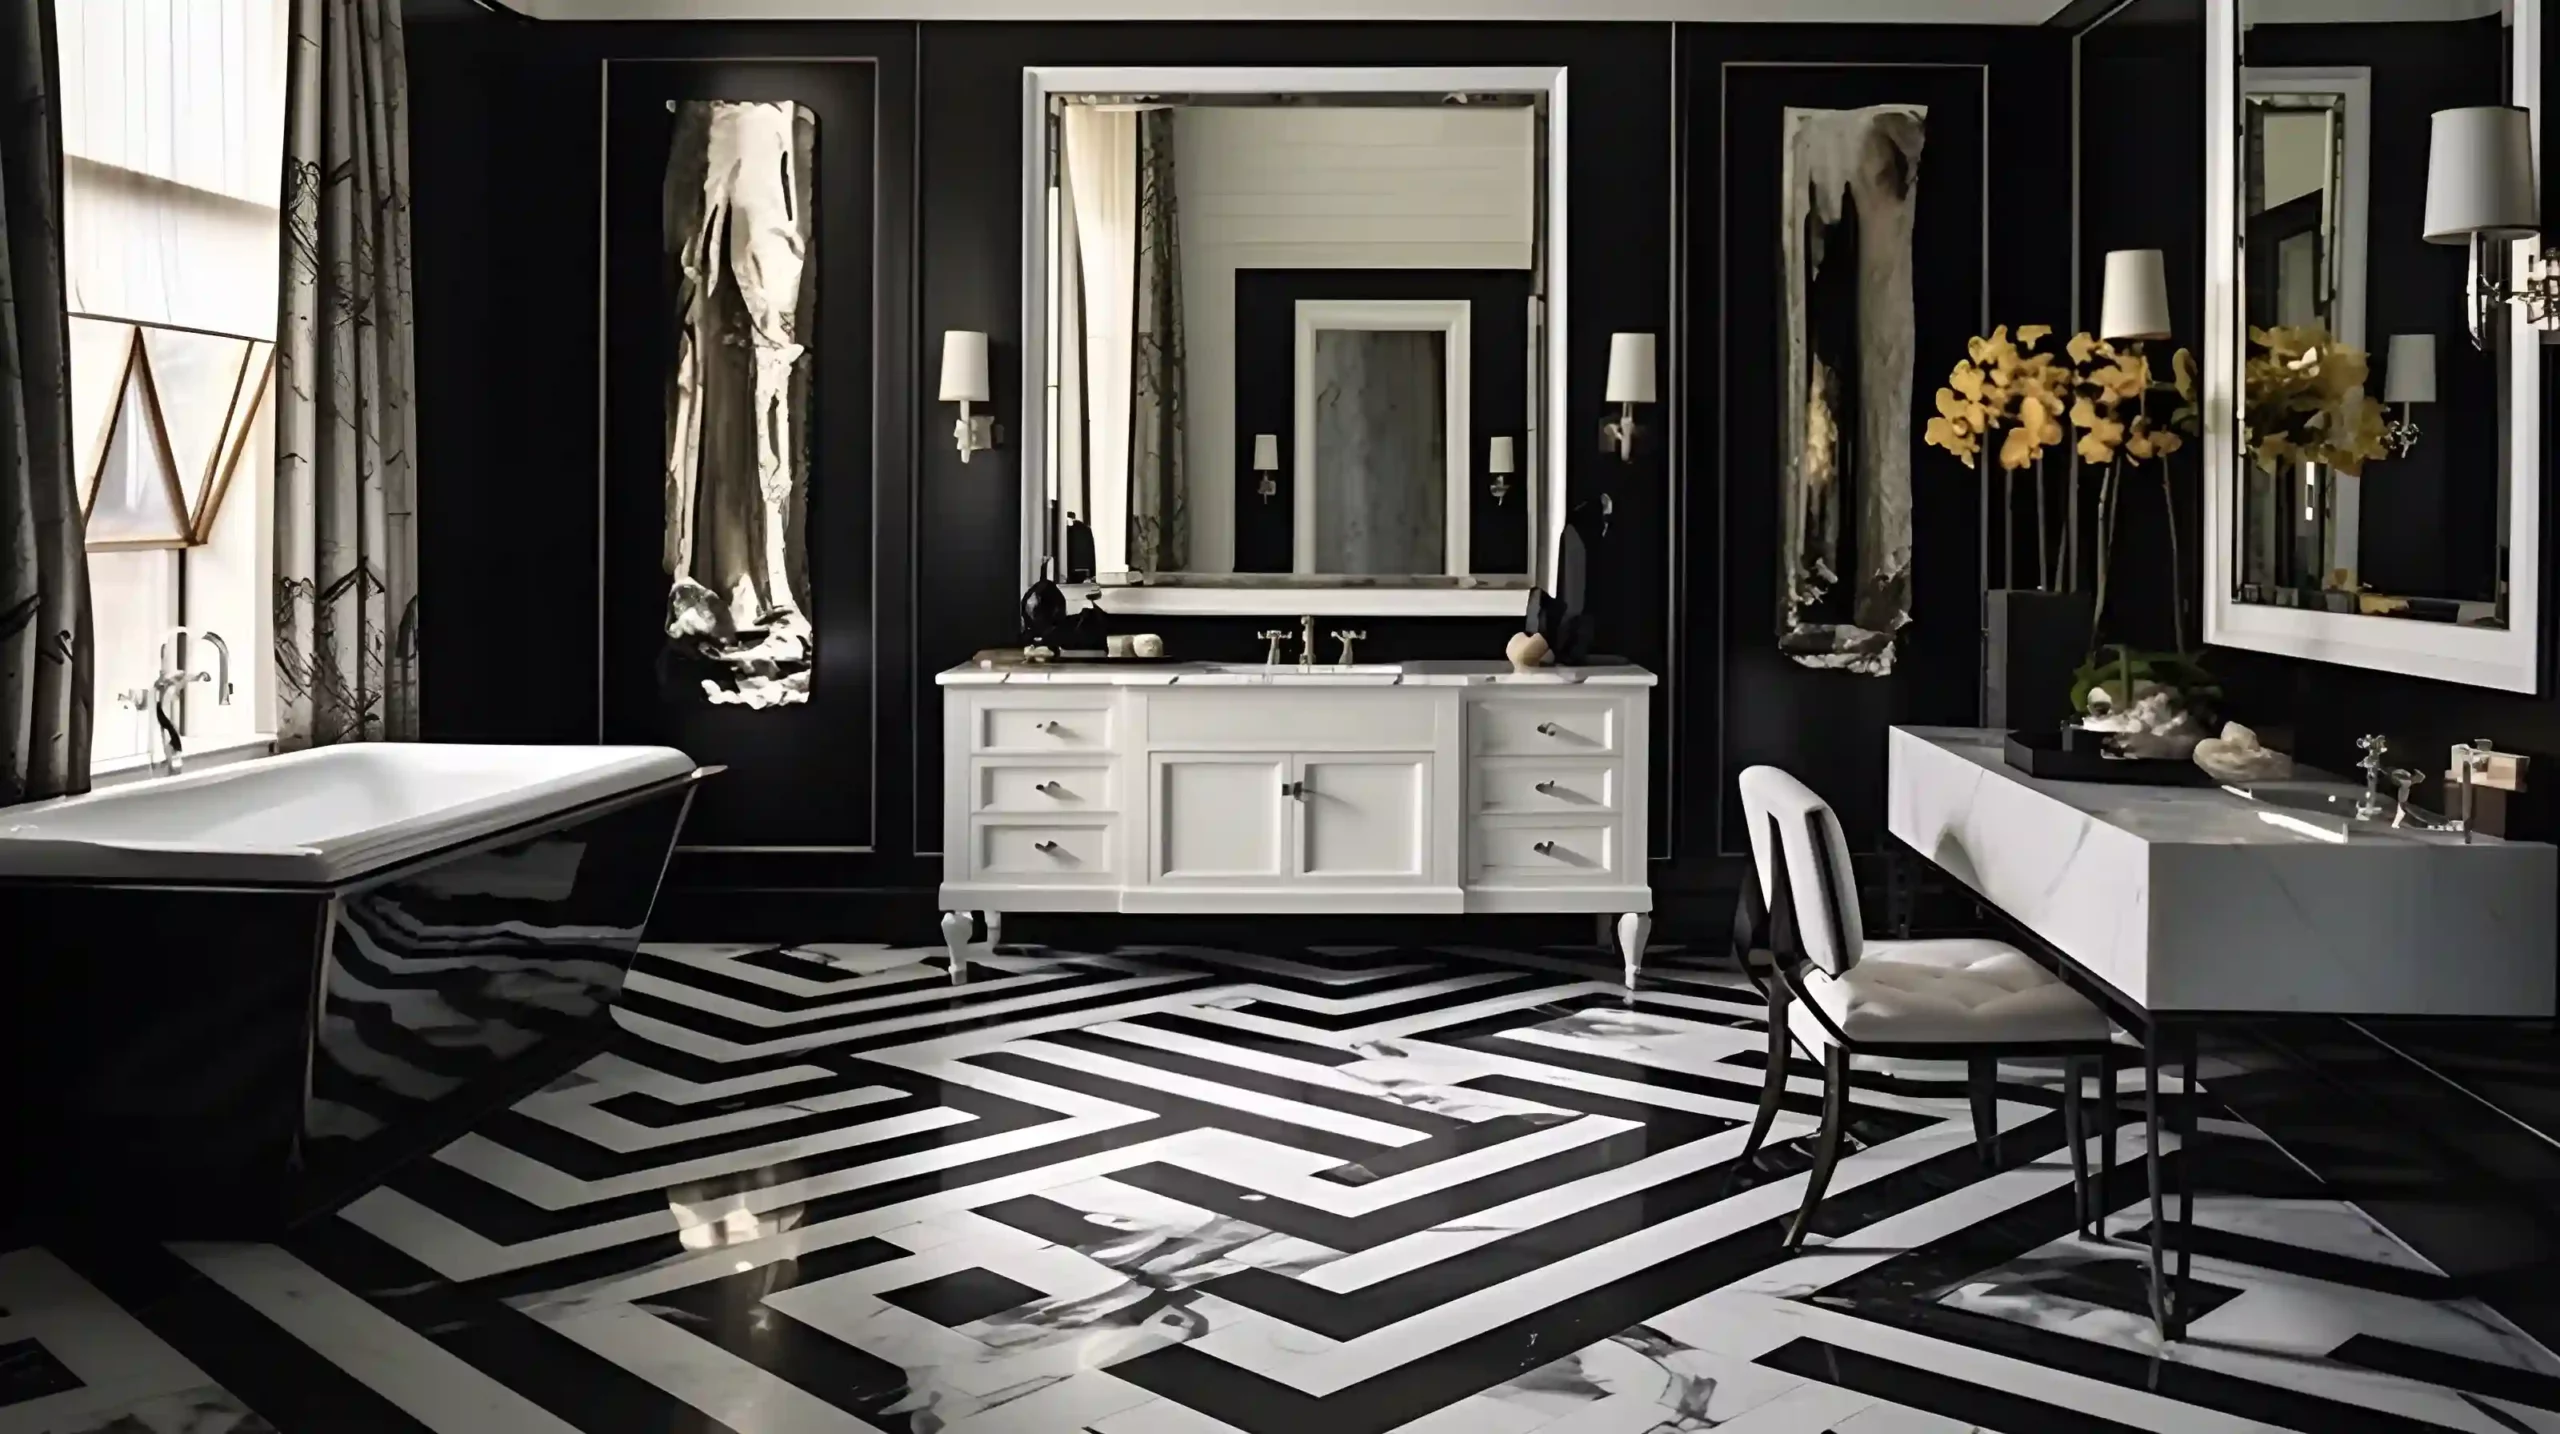 A black and white bathroom with a marble floor.